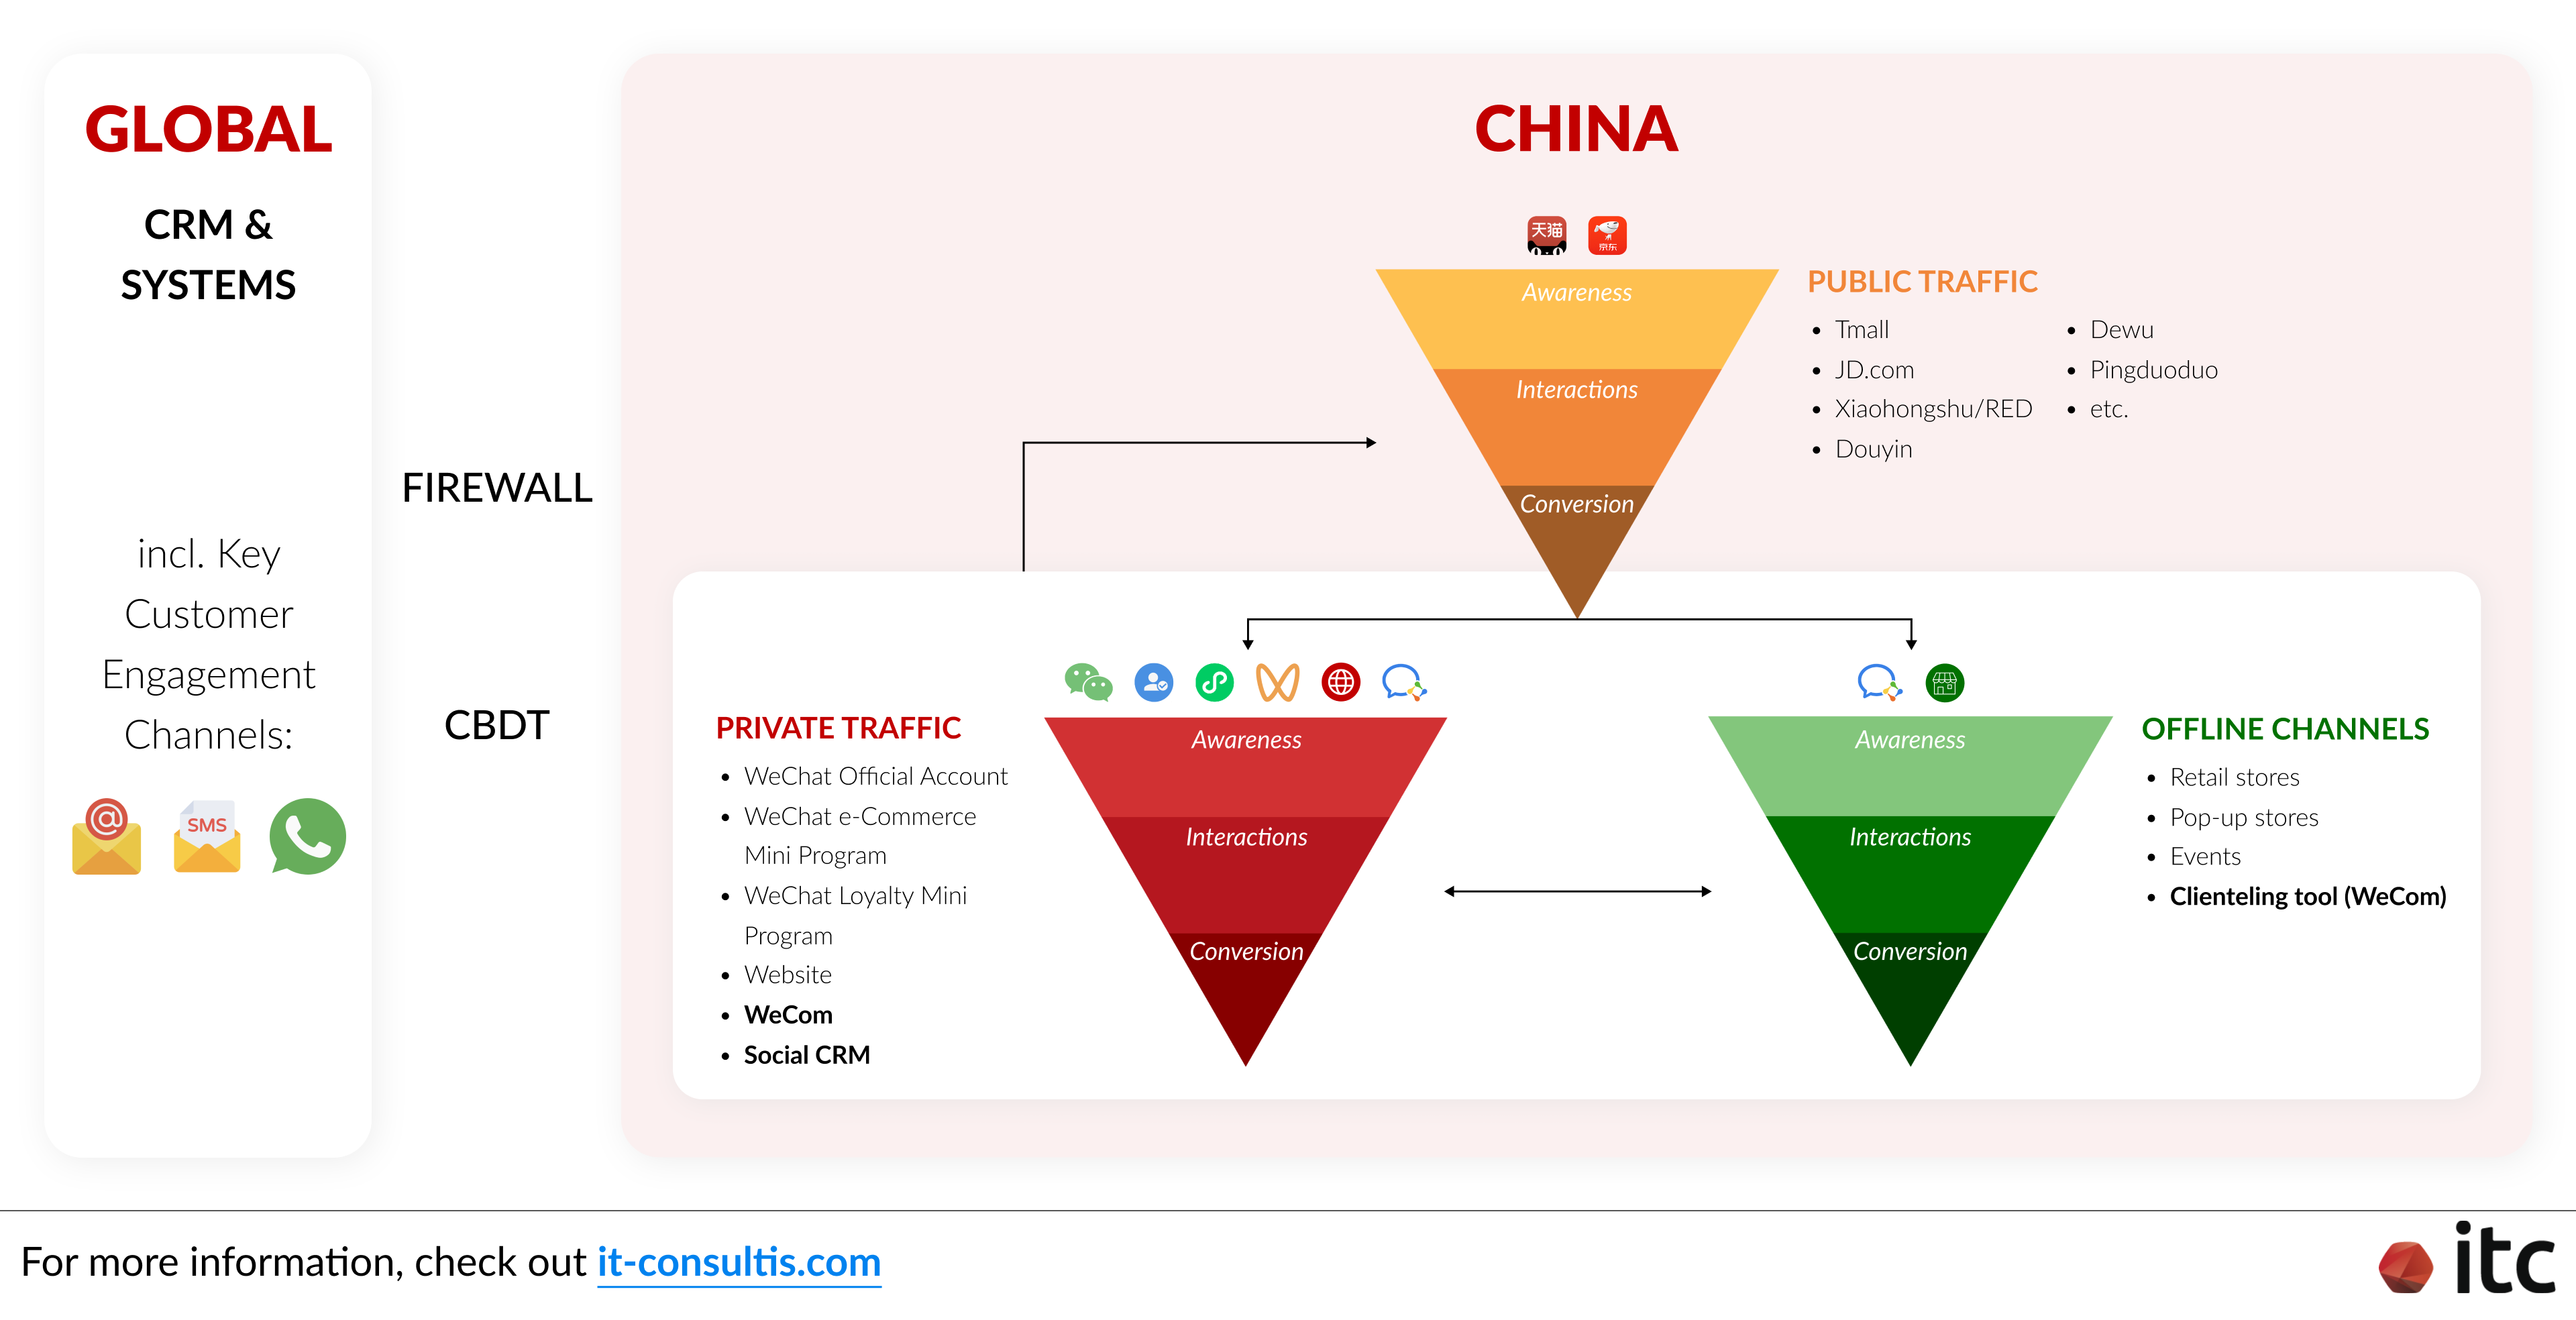 Distinct China digital ecosystem due to the Great Firewall and the China Personal Information Protection Law (PIPL)